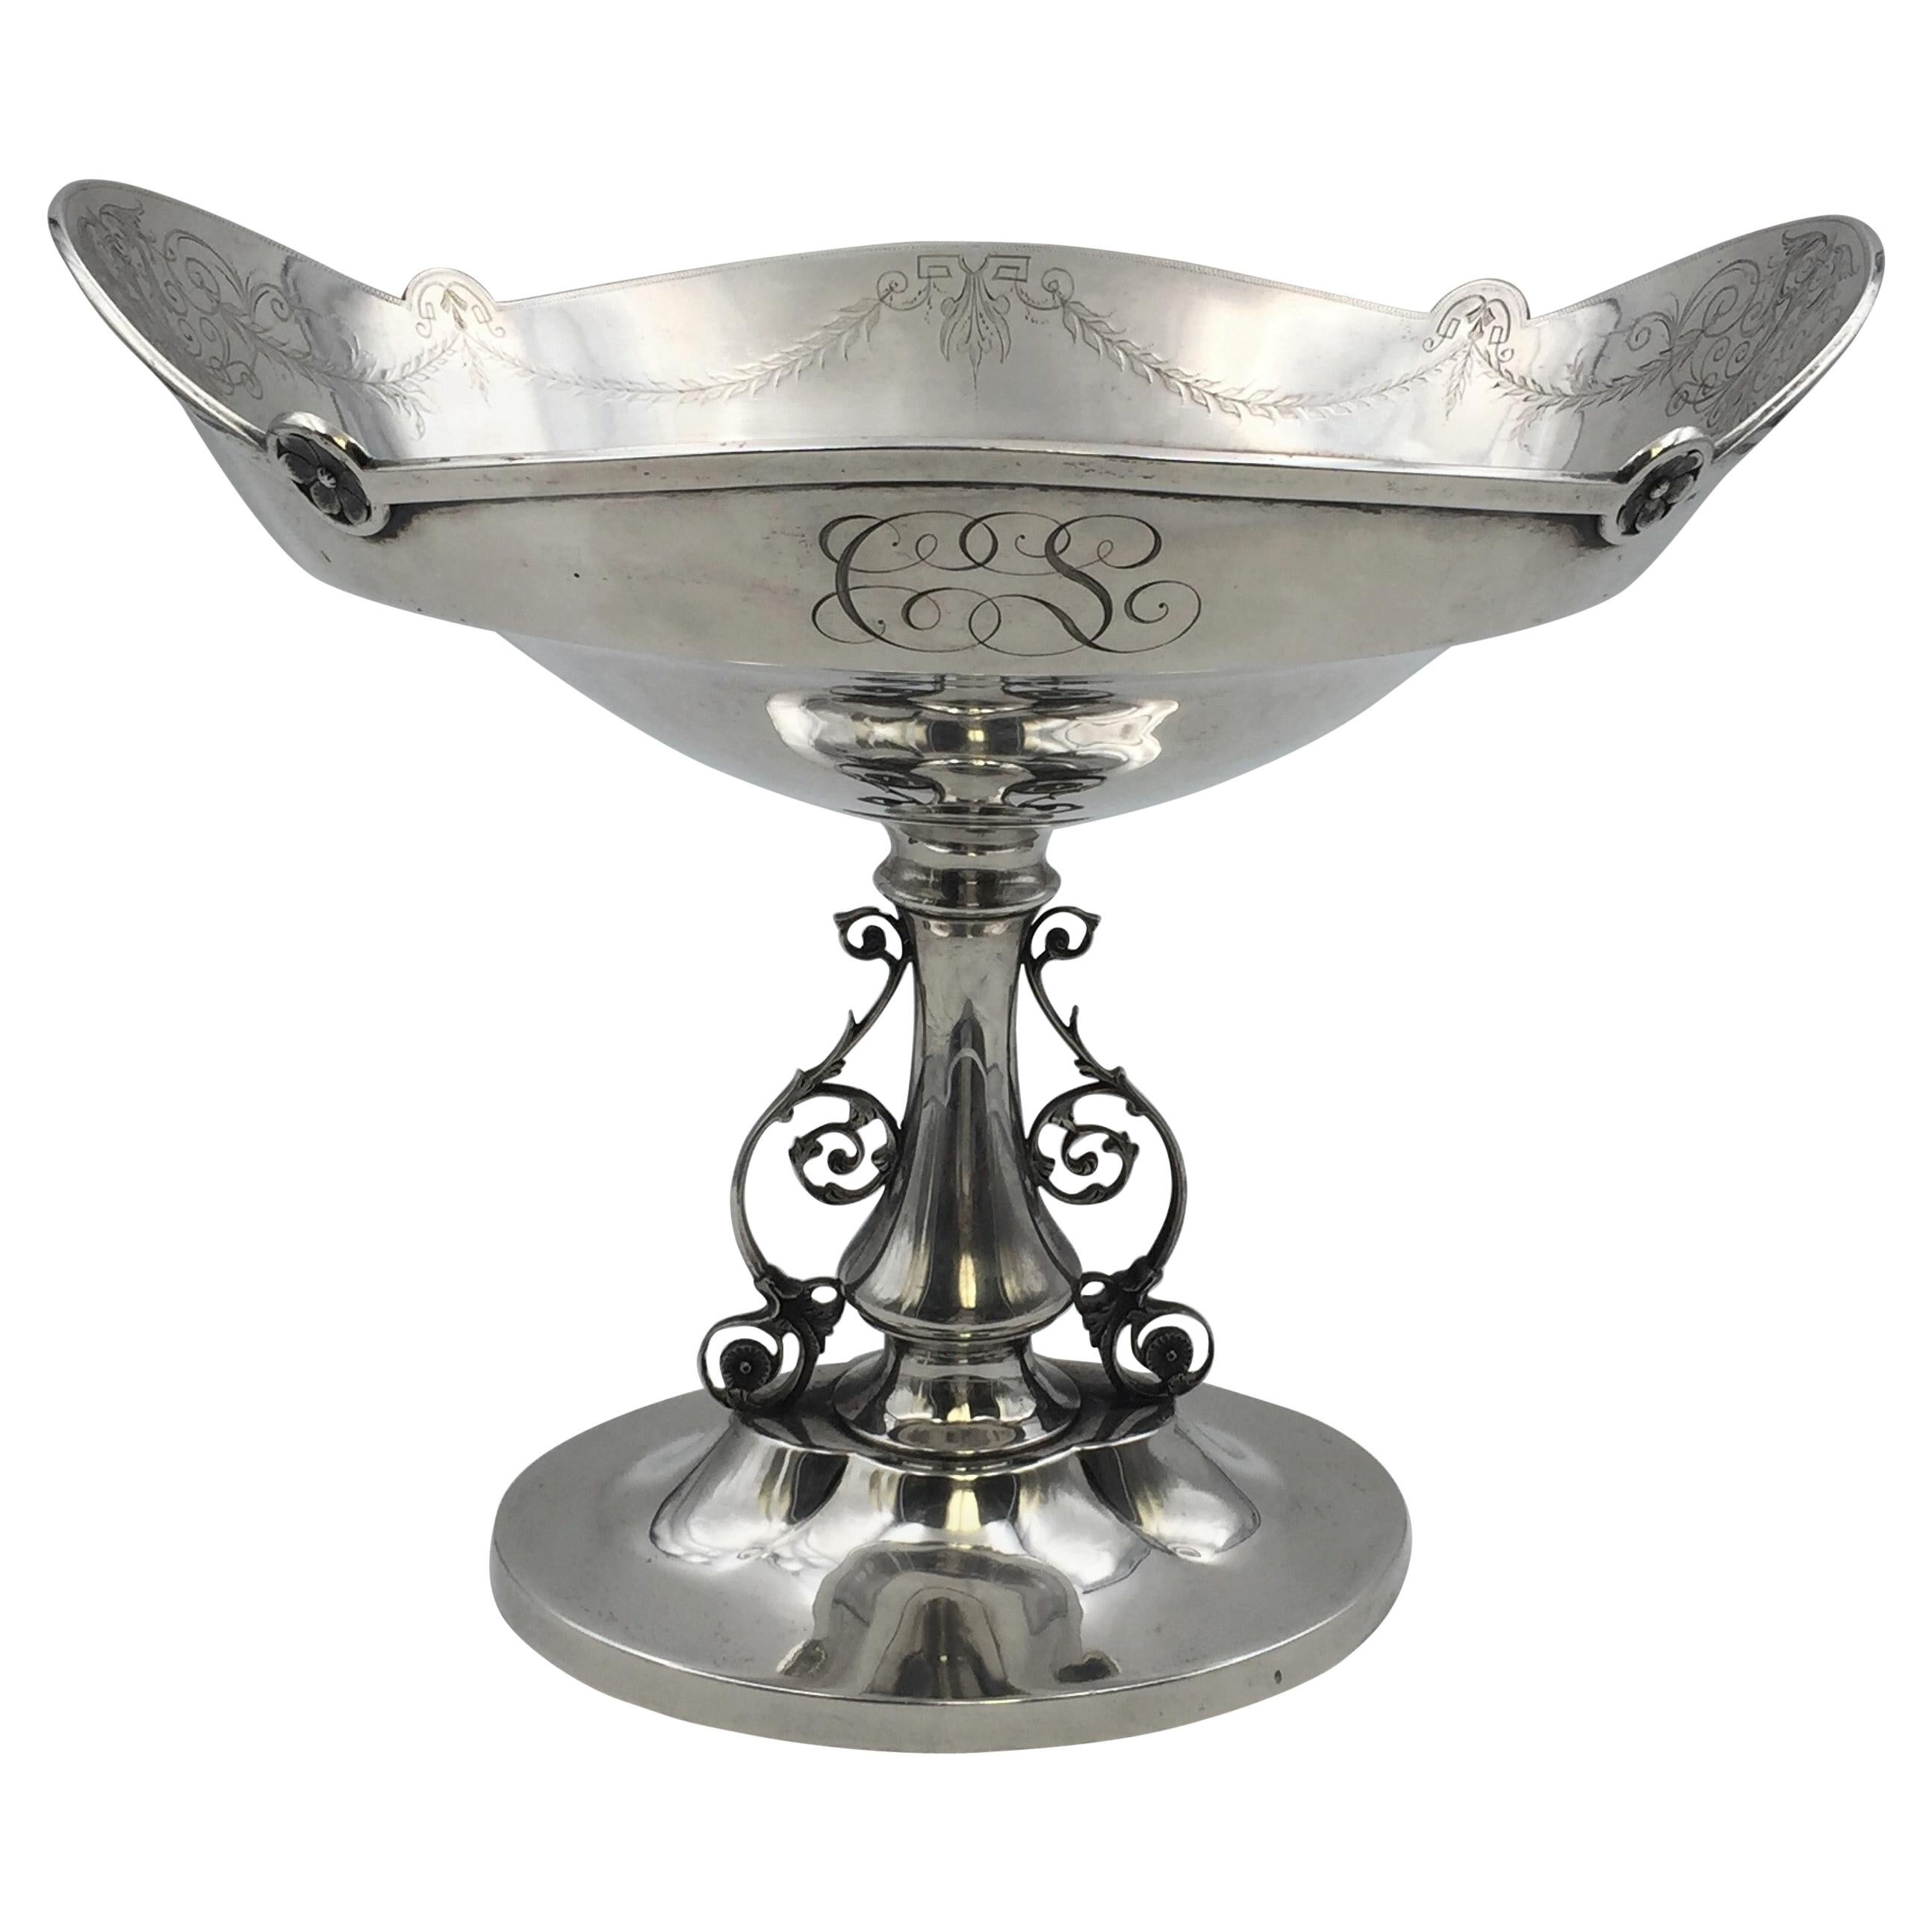 Duhme & Co Coin Silver Centerpiece from Early 1800s For Sale